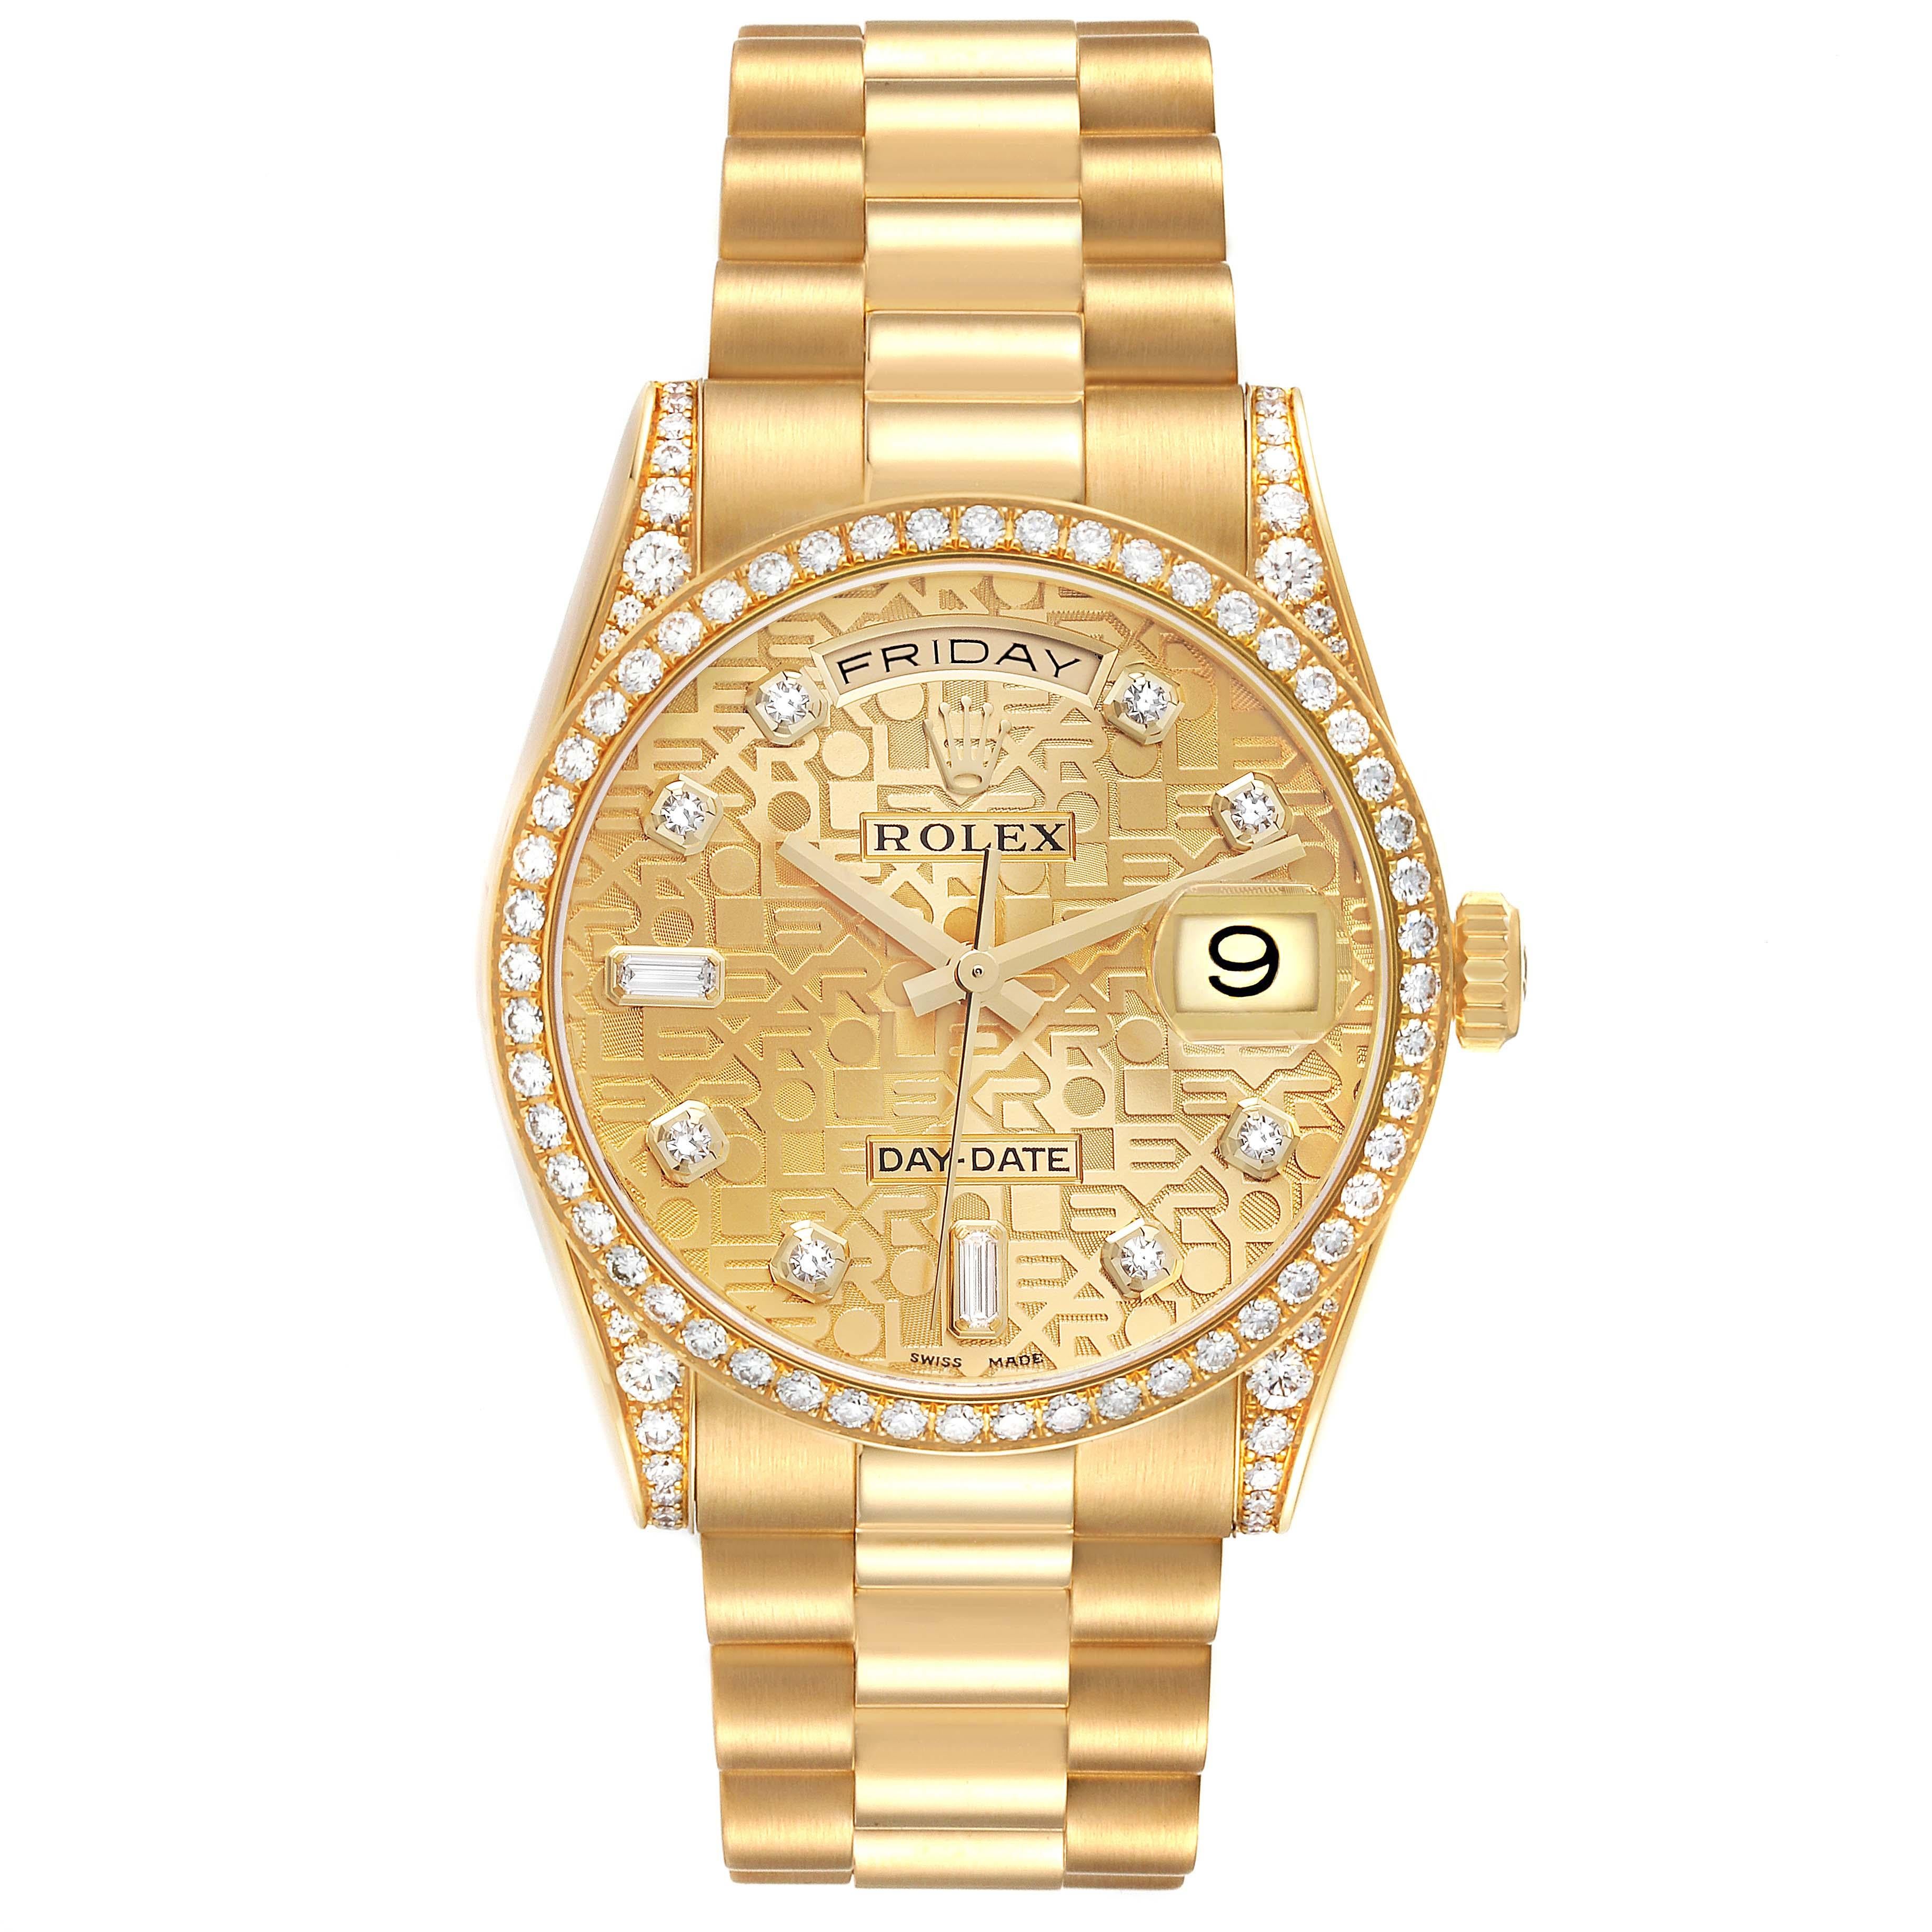 Rolex Day-Date President Yellow Gold Diamond Bezel Mens Watch 118388 Box Papers. Officially certified chronometer self-winding movement. Double quick set function. 18k yellow gold oyster case 36.0 mm in diameter. Rolex logo on the crown. Lugs are